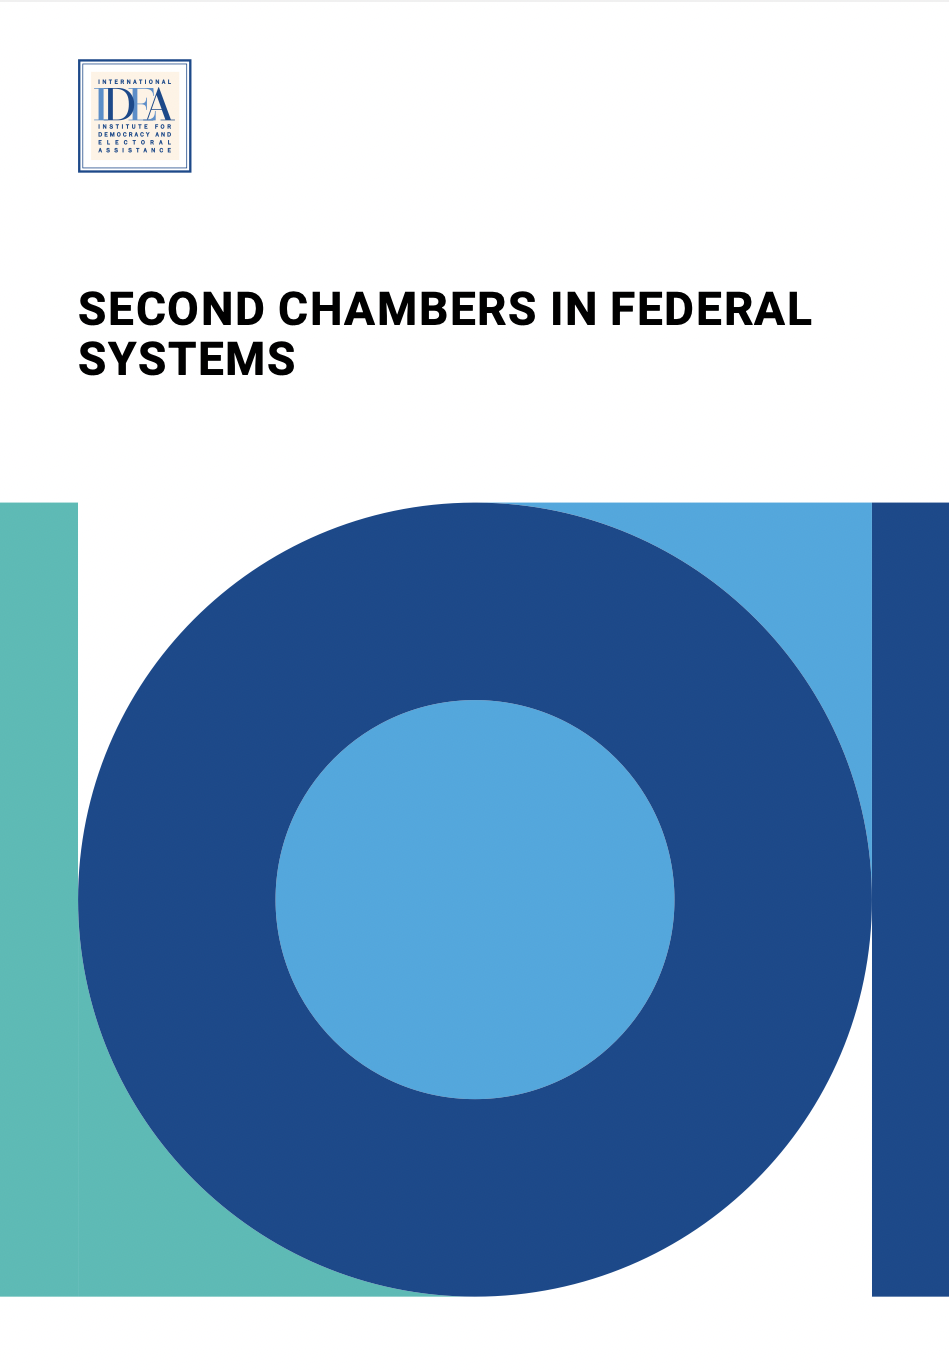 SECOND CHAMBERS IN FEDERAL SYSTEMS